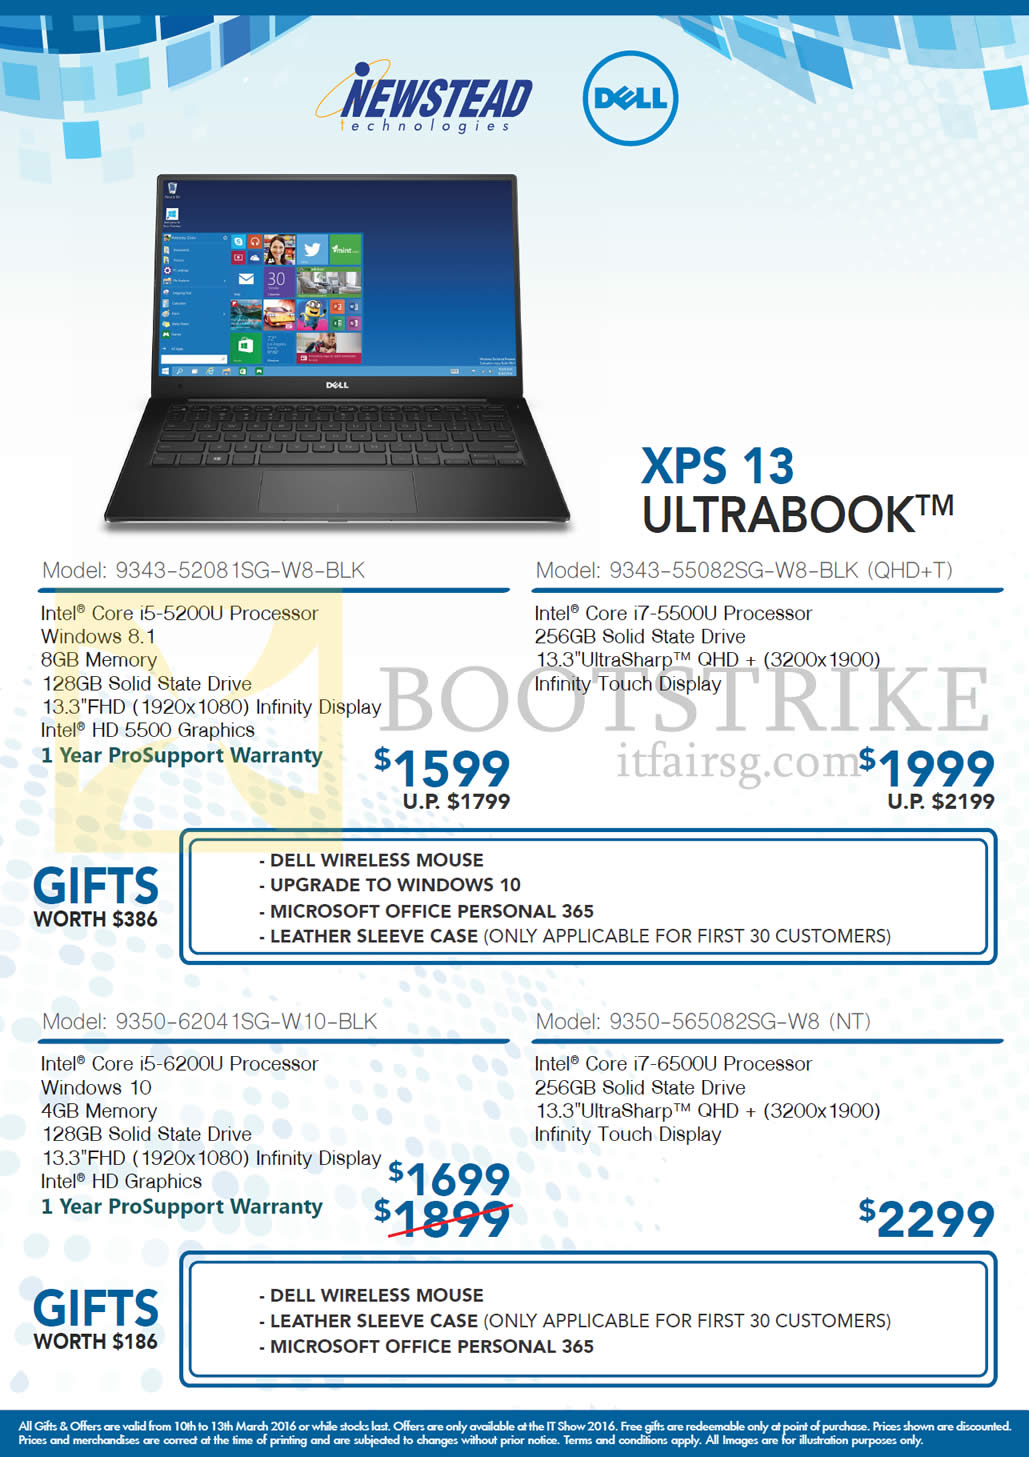 IT SHOW 2016 price list image brochure of Dell Newstead Notebooks XPS 13